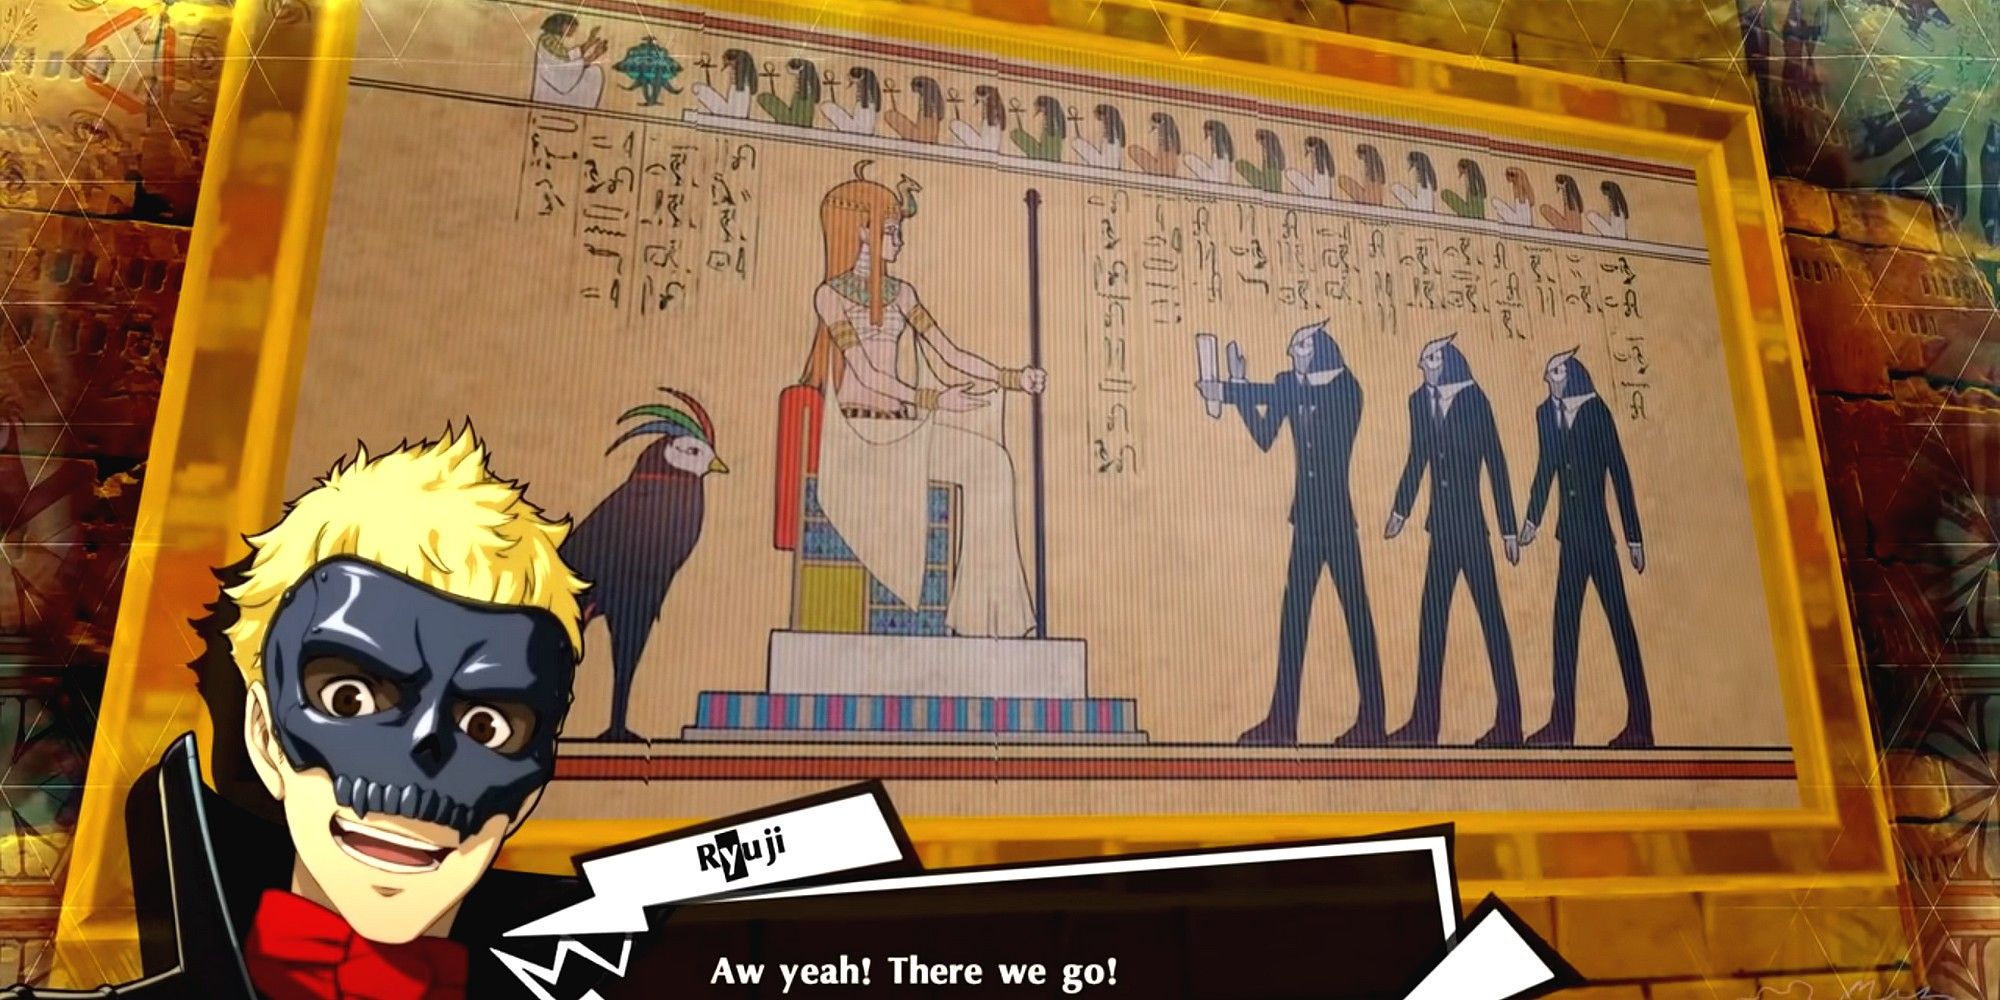 ryuji reacting to futaba's first puzzle solution